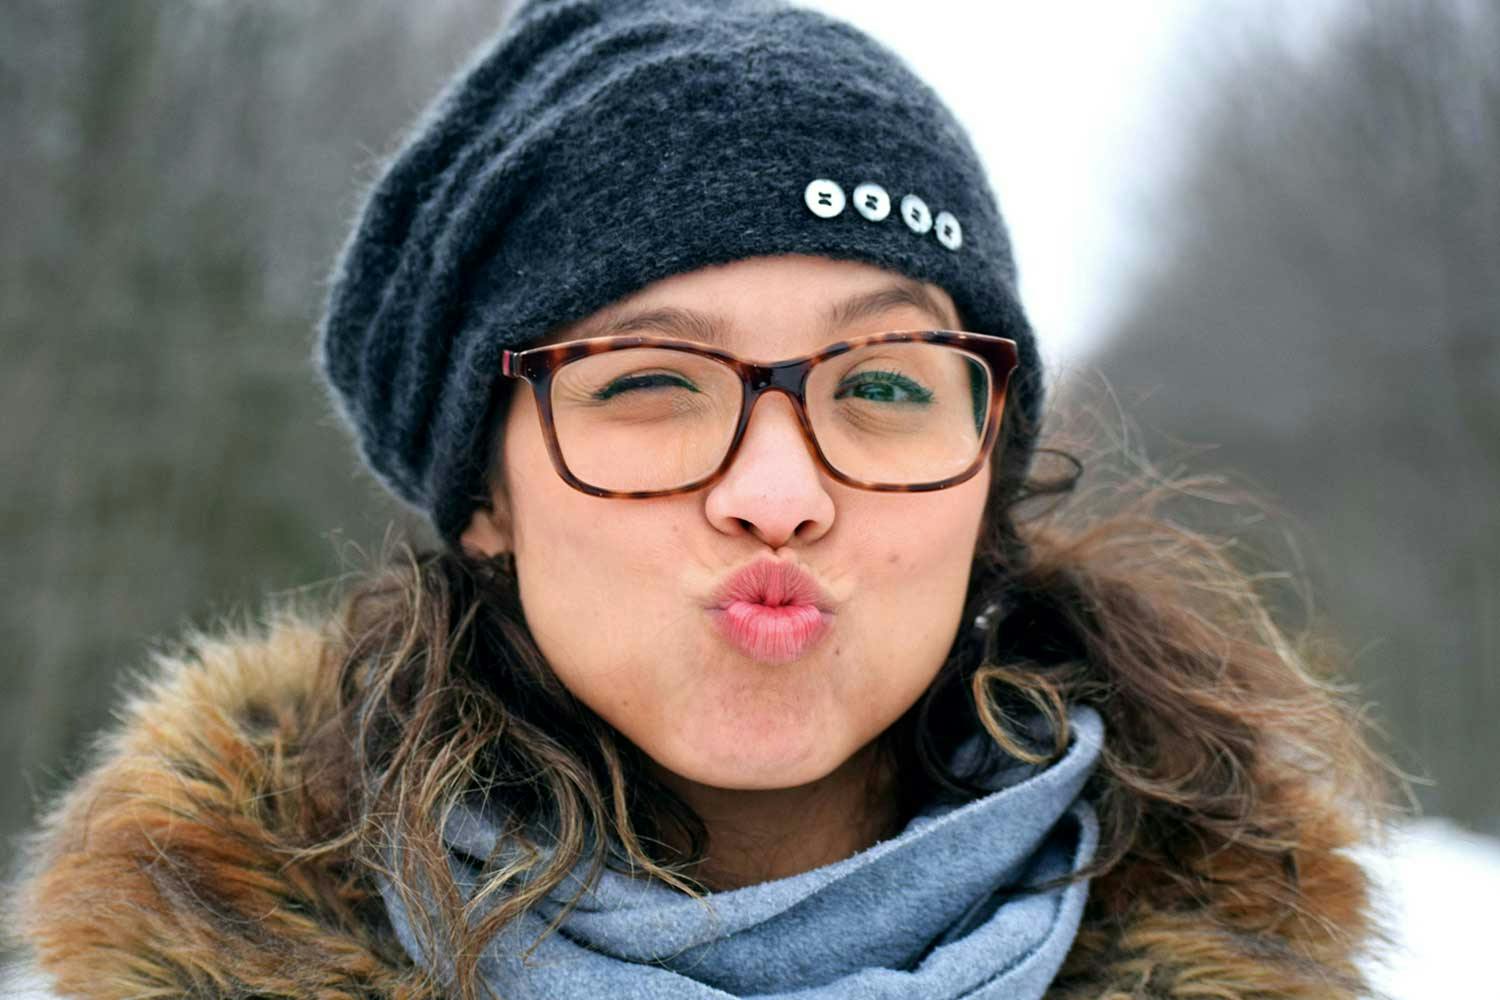 A light-skinned woman wearing glasses, a grey knit hat, and a fur-lined jacket winks and purses her lips.